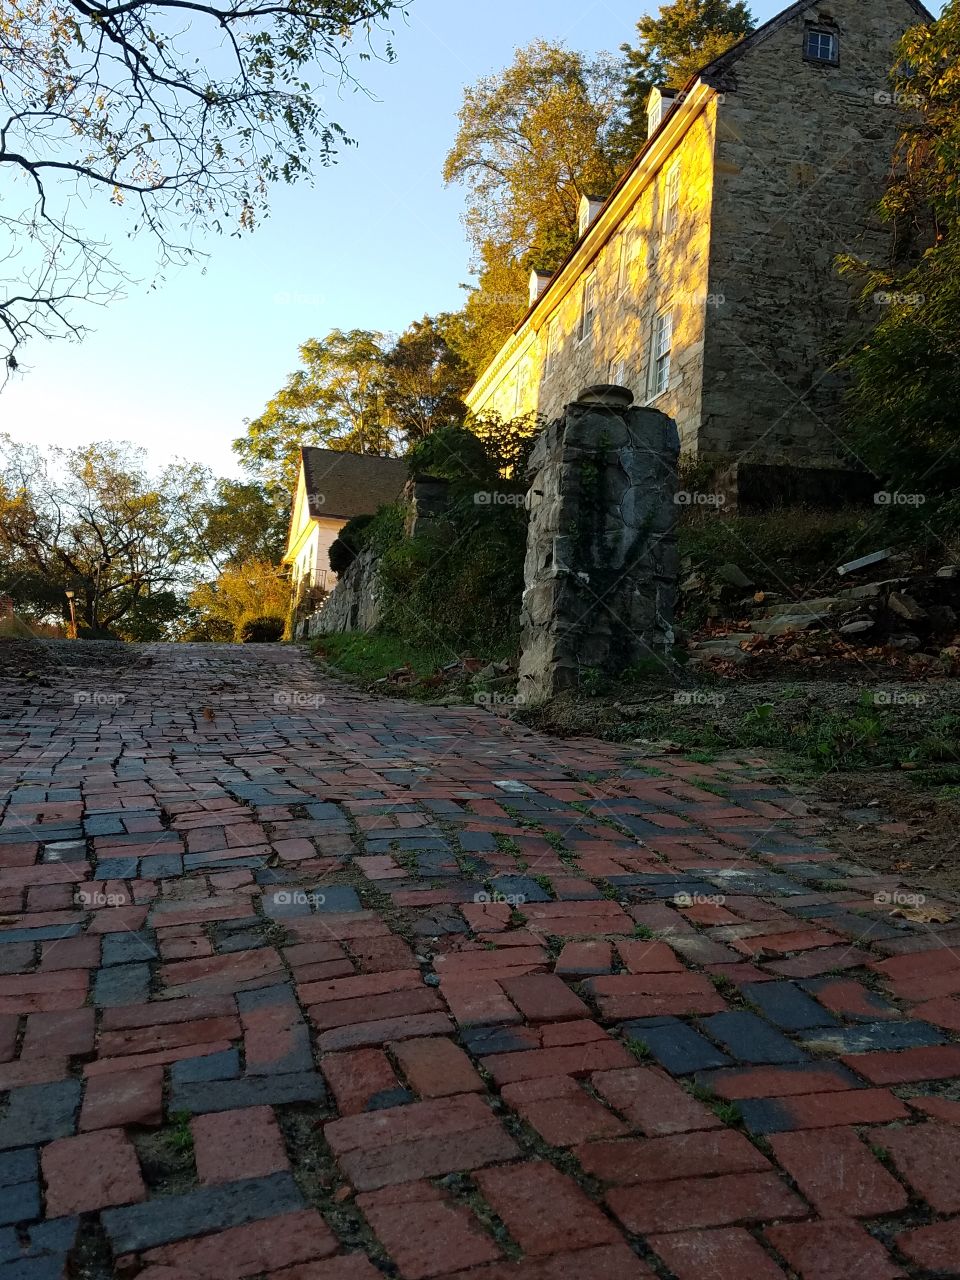 Brick driveway in front of mansion